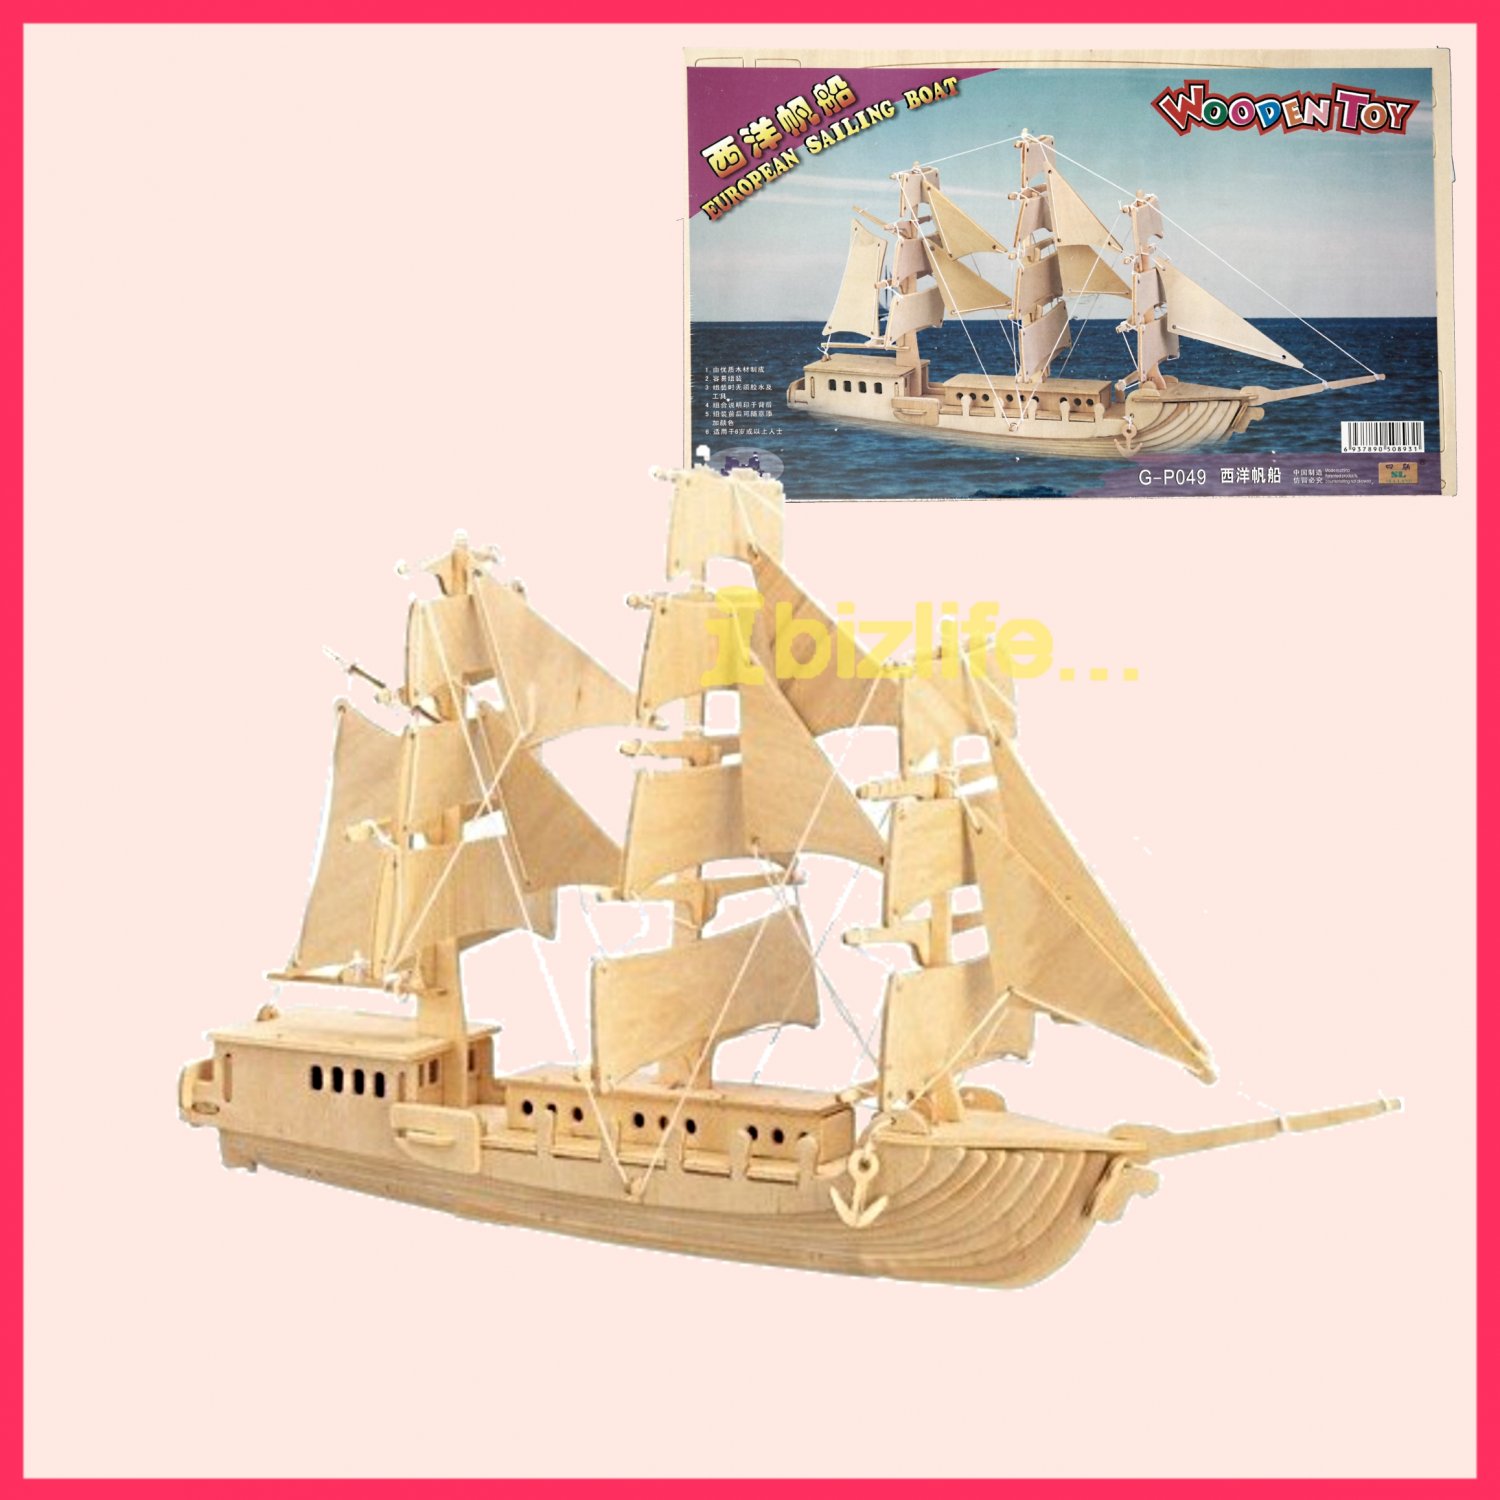 Download Wooden 3D puzzle - SAILING BOAT as DIY jigsaw Children educational Toy gift (WP06)